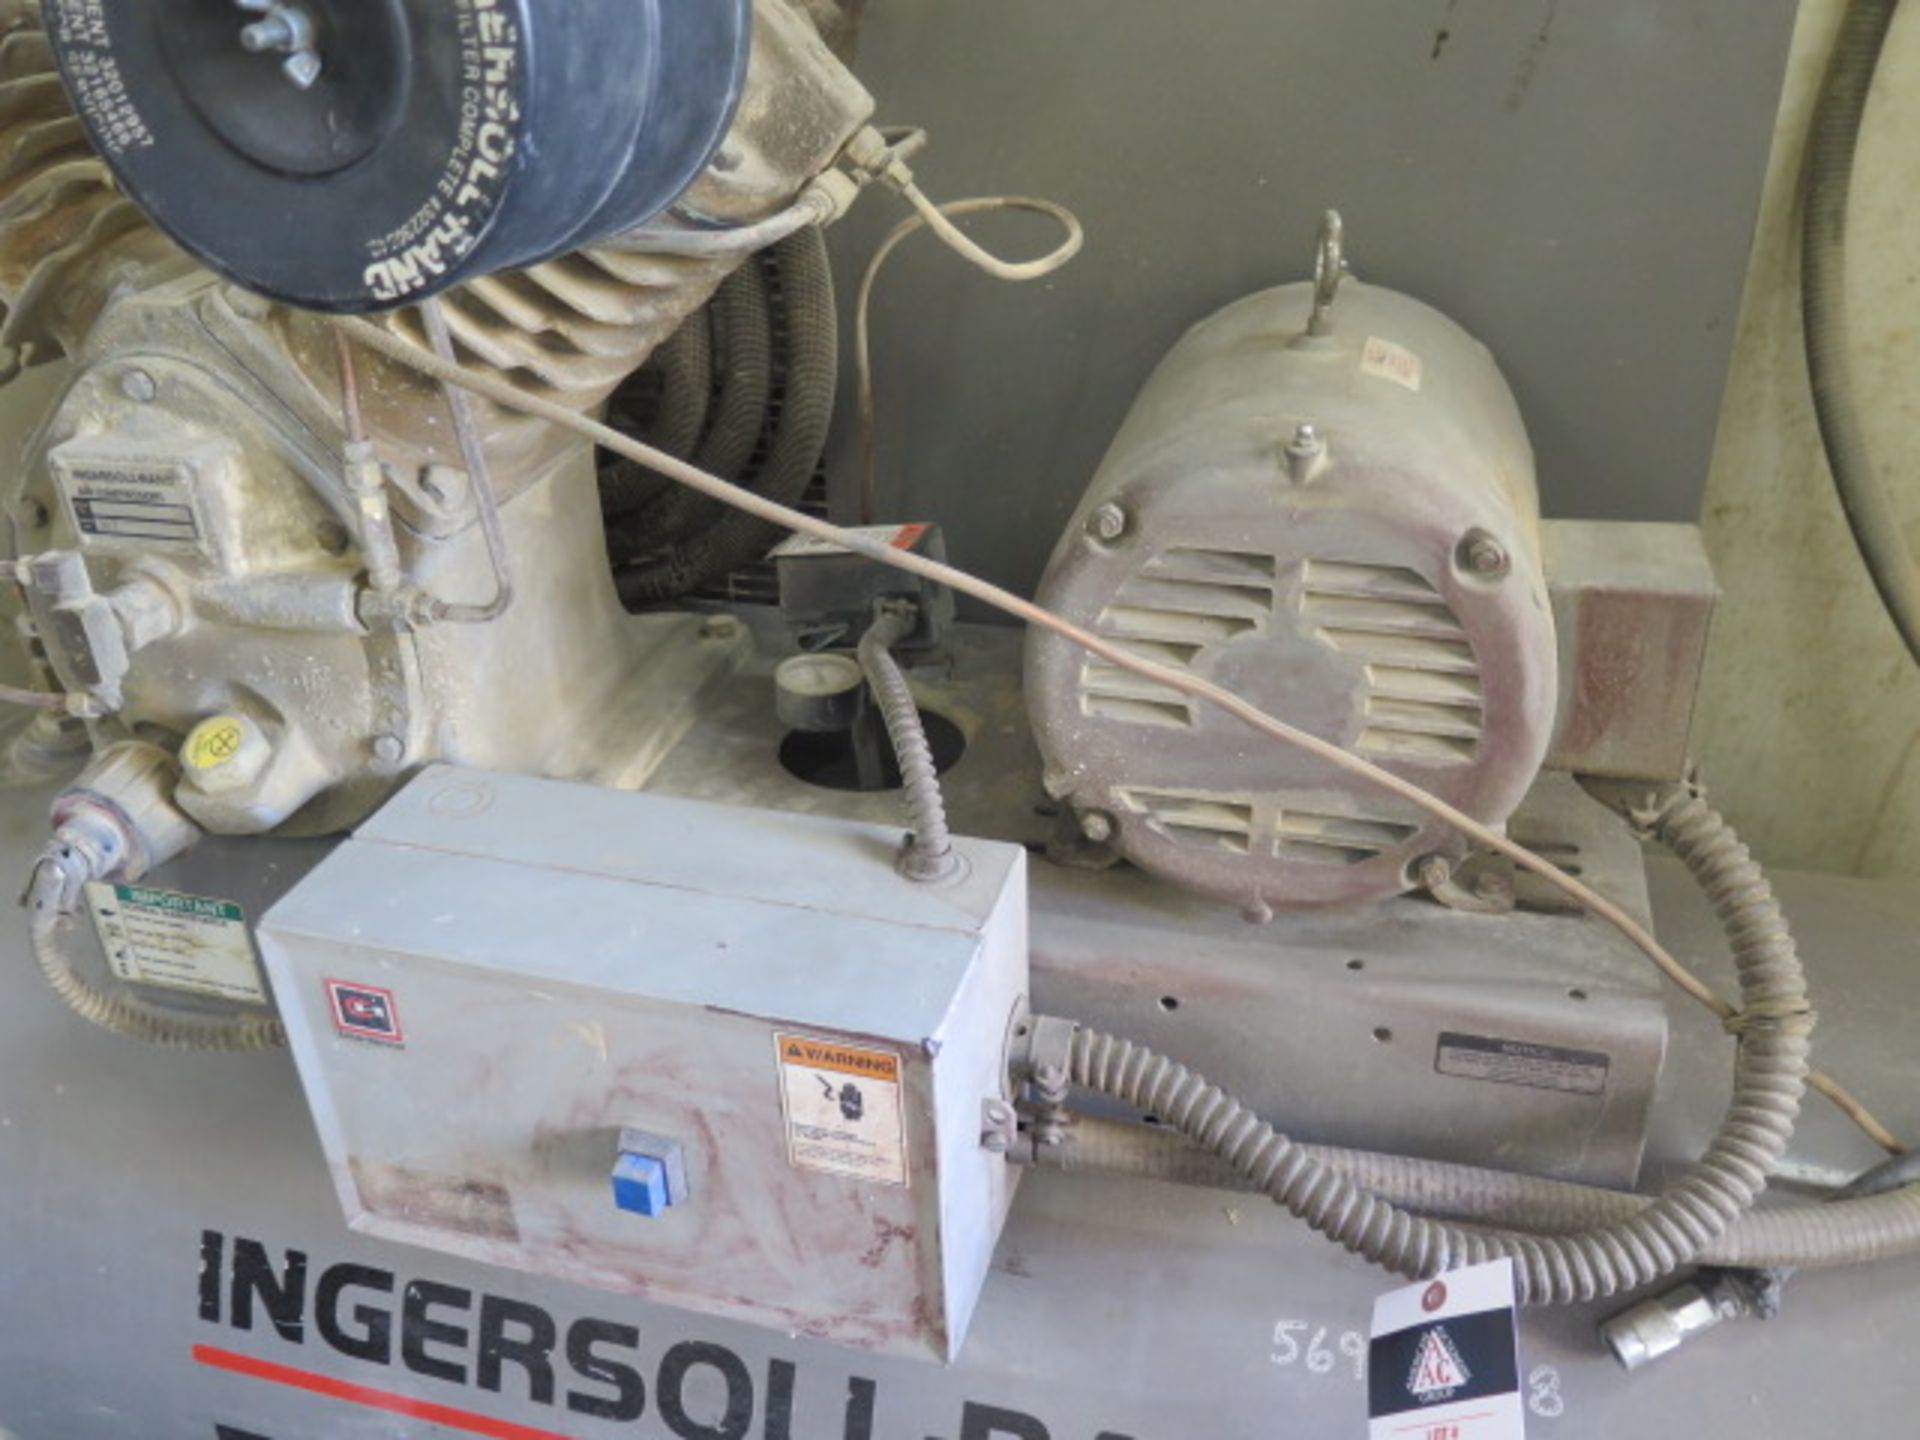 Ingersoll Rand T30 10/7.5Hp Horizontal Air Compressor w/ 2-Stage Pump, 80 Gallon SOLD AS IS - Image 5 of 7